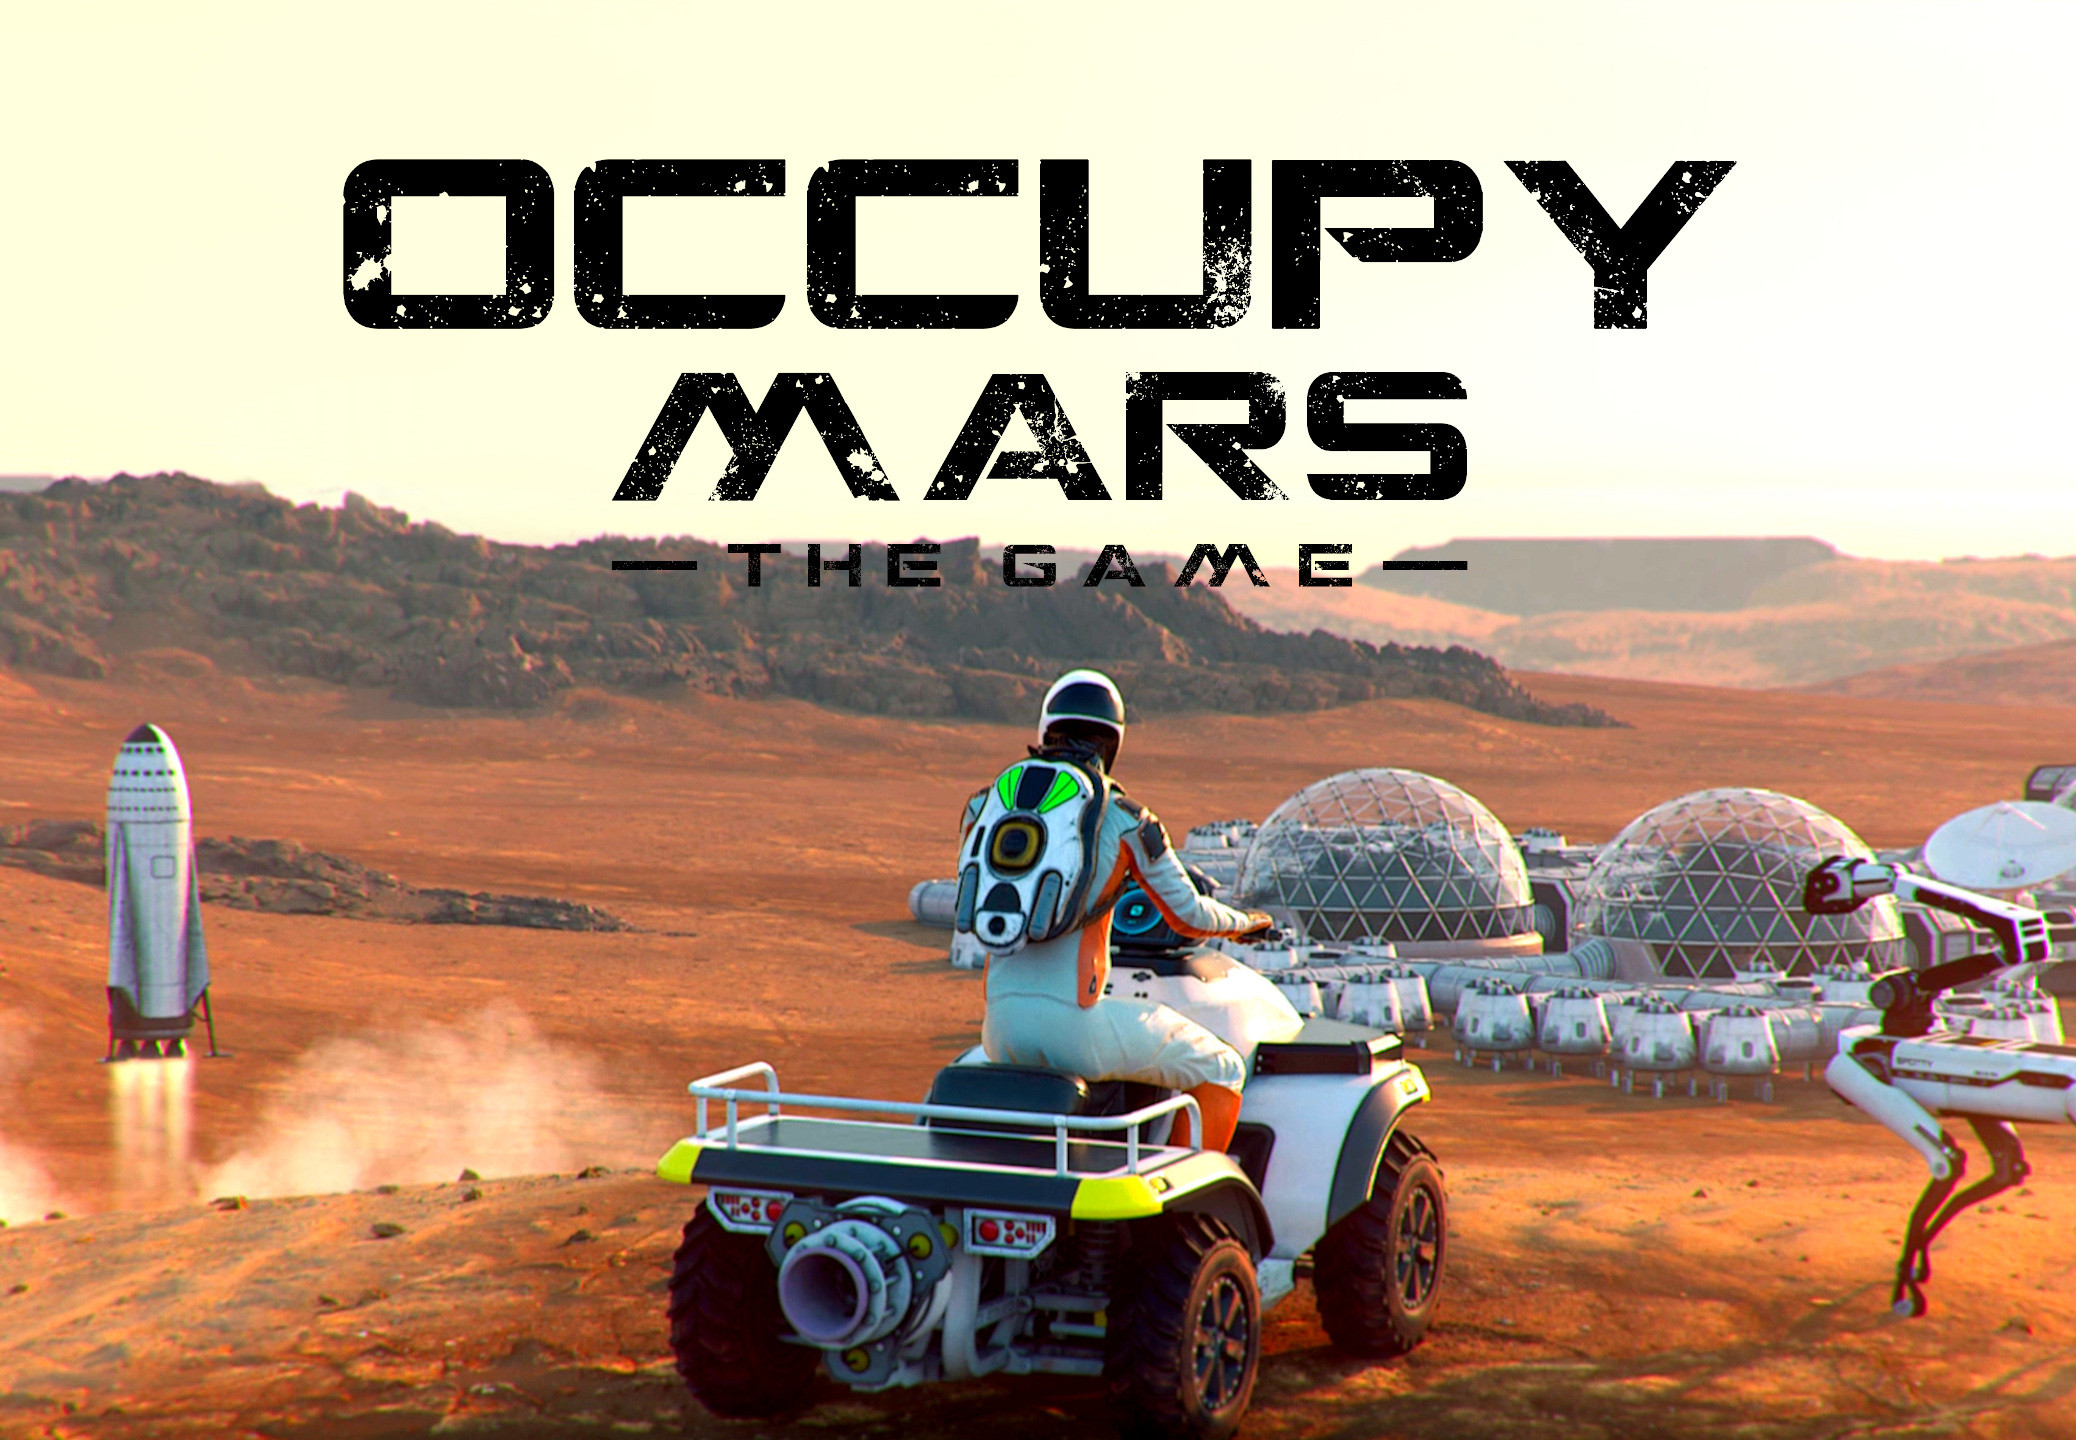 Occupy Mars: The Game Steam Altergift